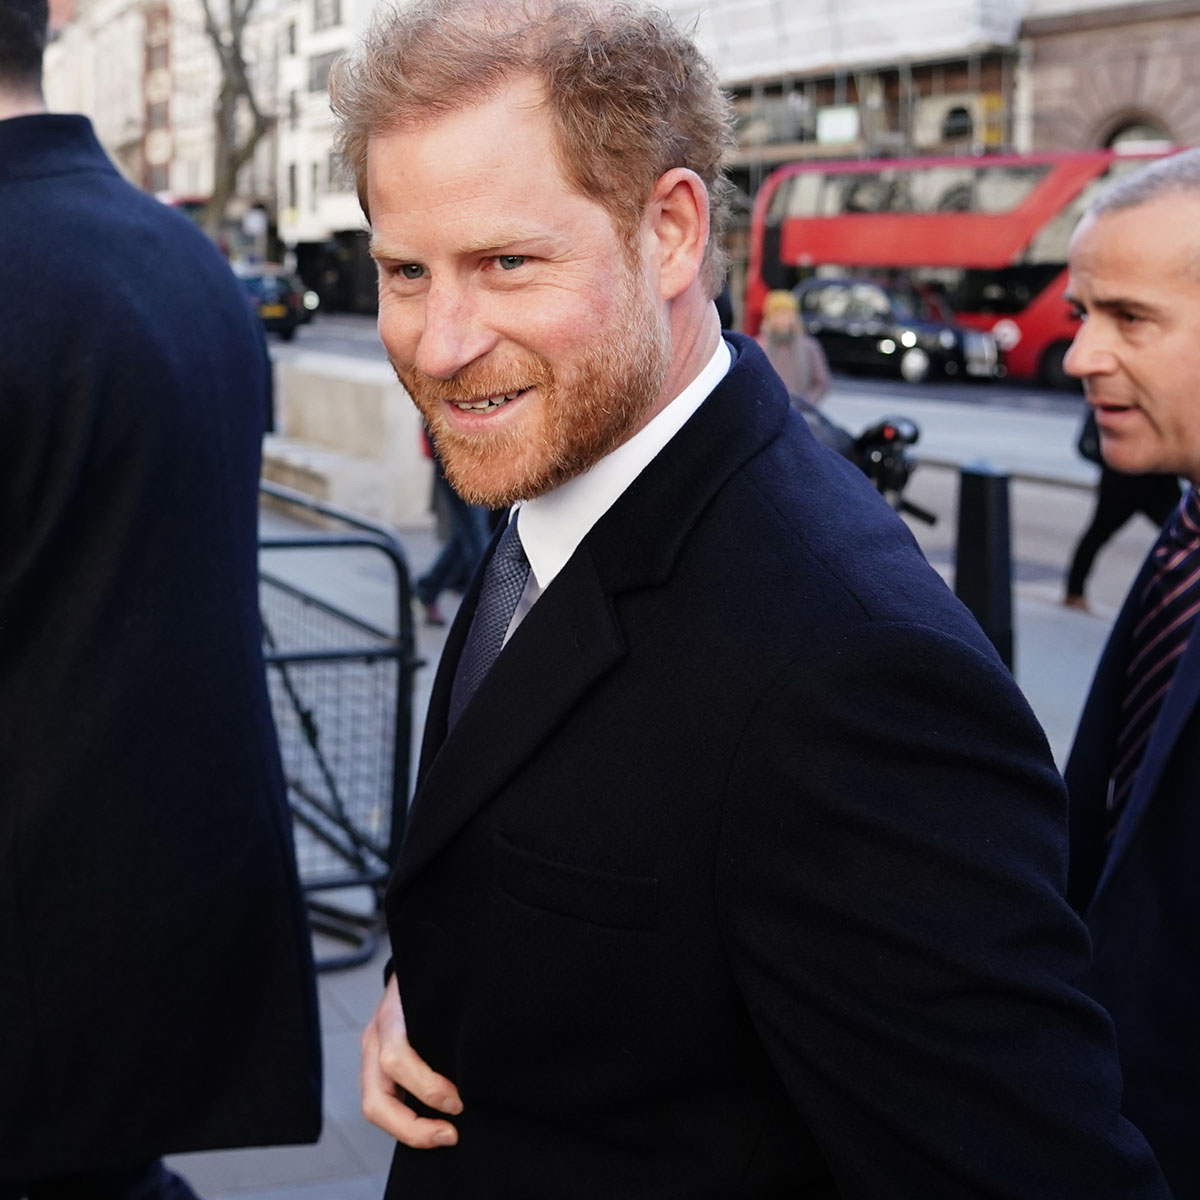 Prince Harry Returns to London for Case Against Tabloid Publisher